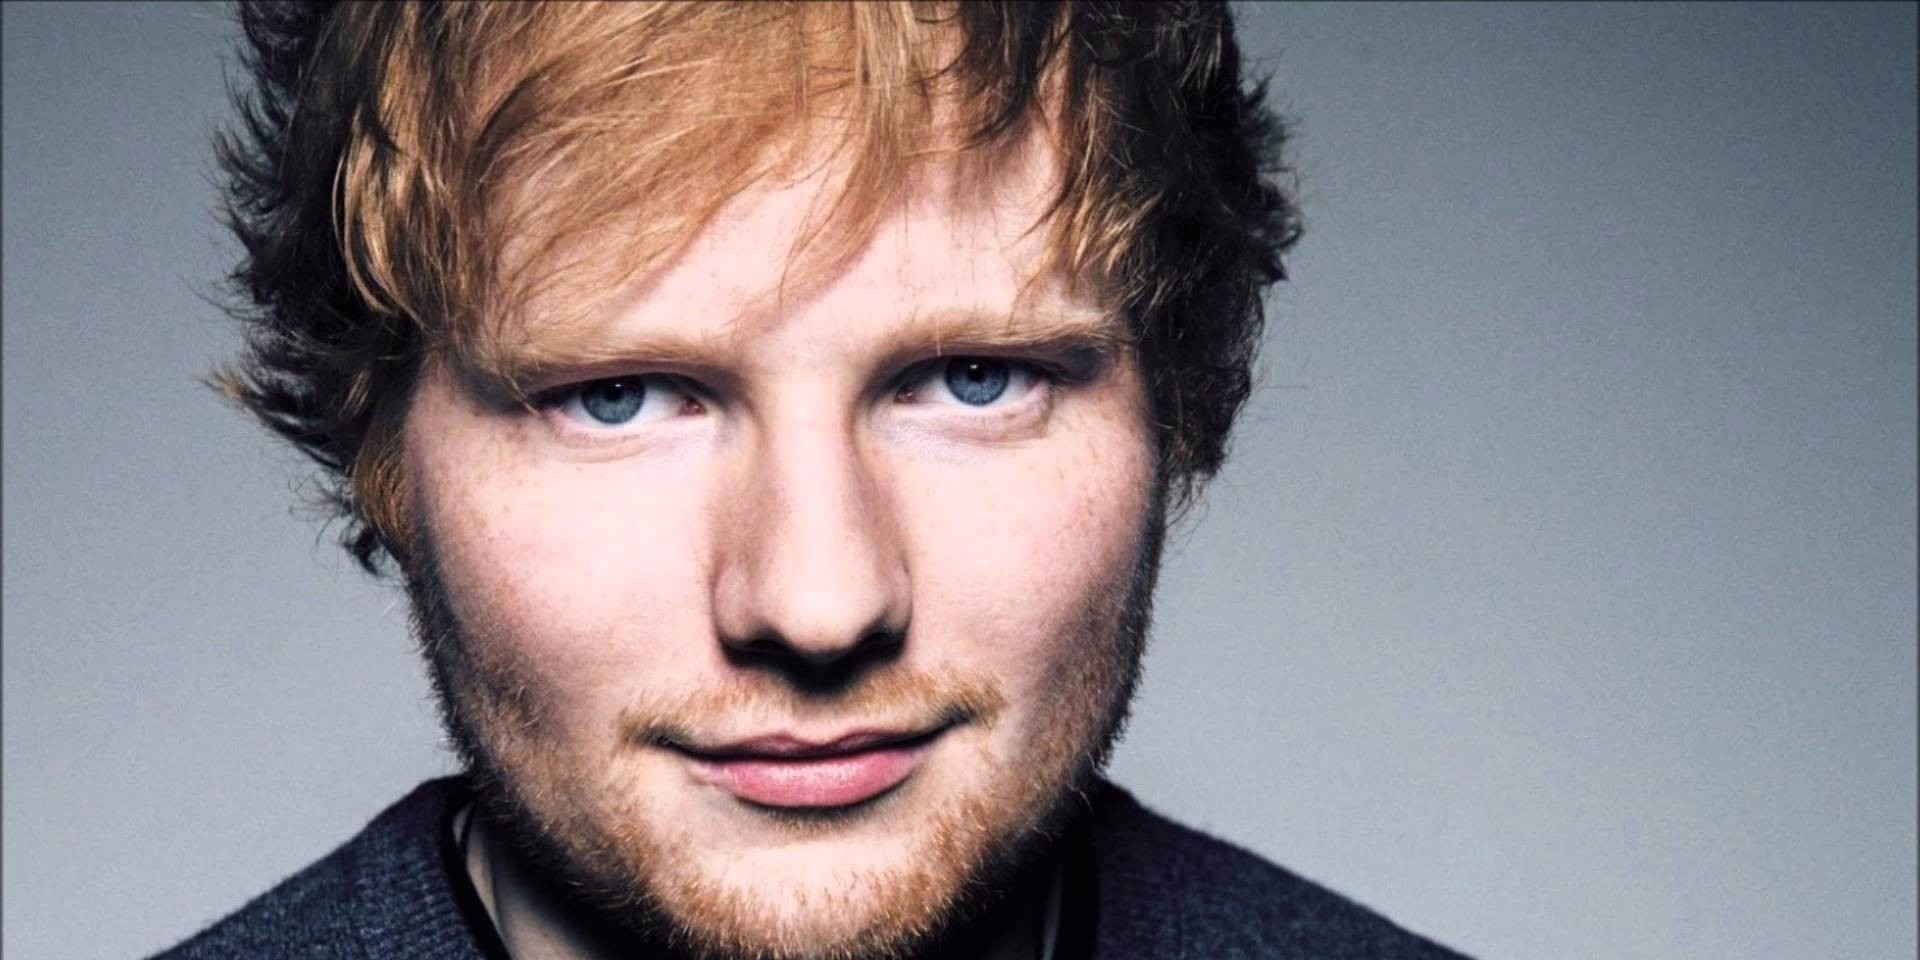 Ed Sheeran tickets are still available but scalpers are selling them online for twice the price